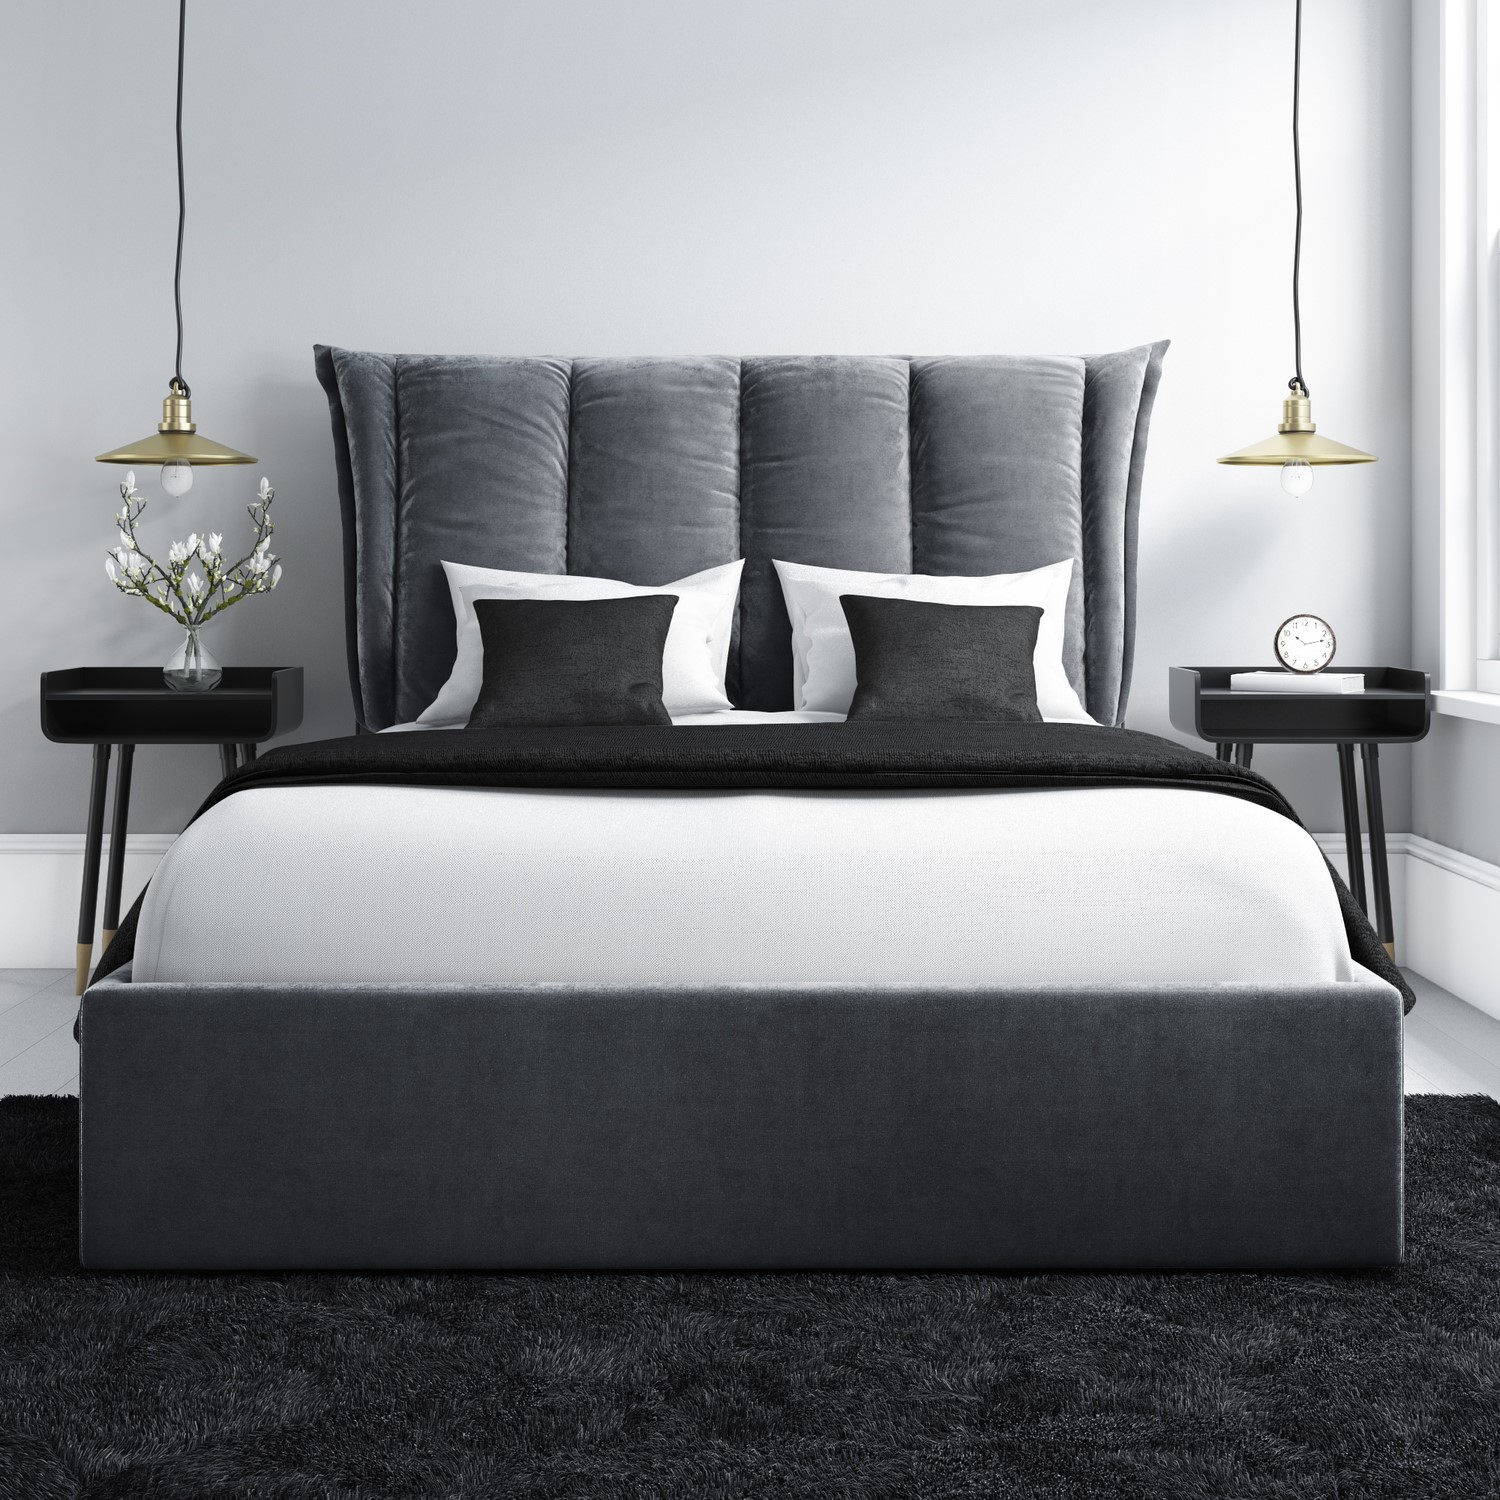 Grey Velvet King Size Ottoman Bed With, King Size Ottoman Beds Uk